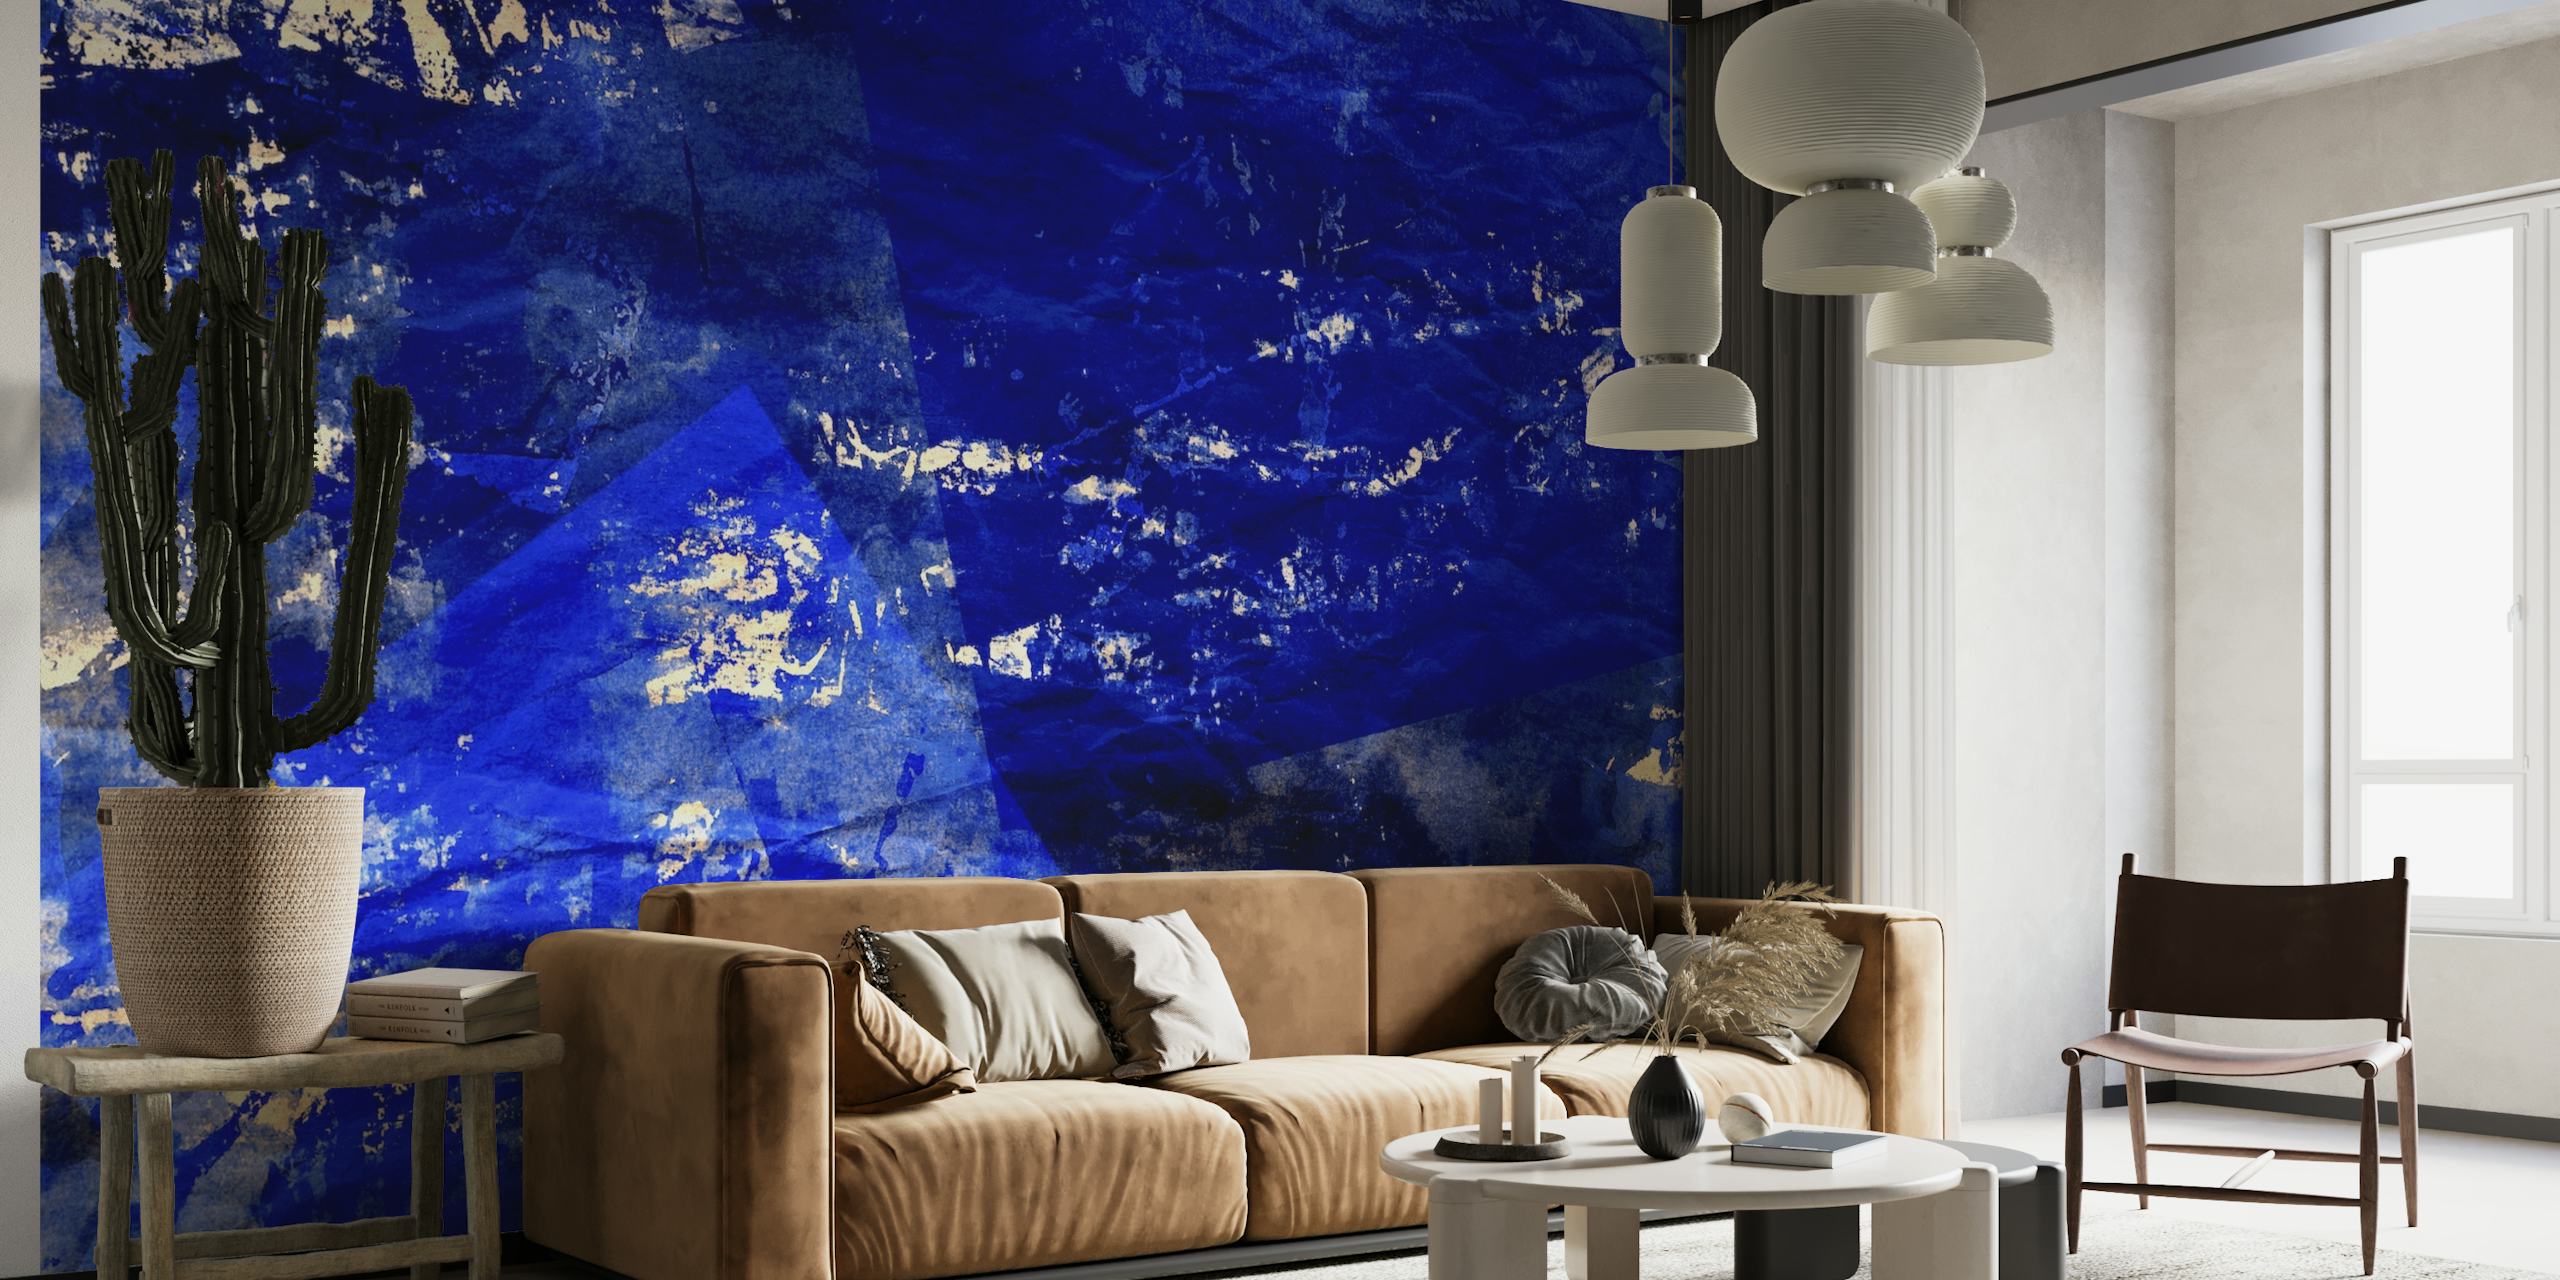 Cosmic Universe wall mural featuring deep blue galactic patterns with star-like accents